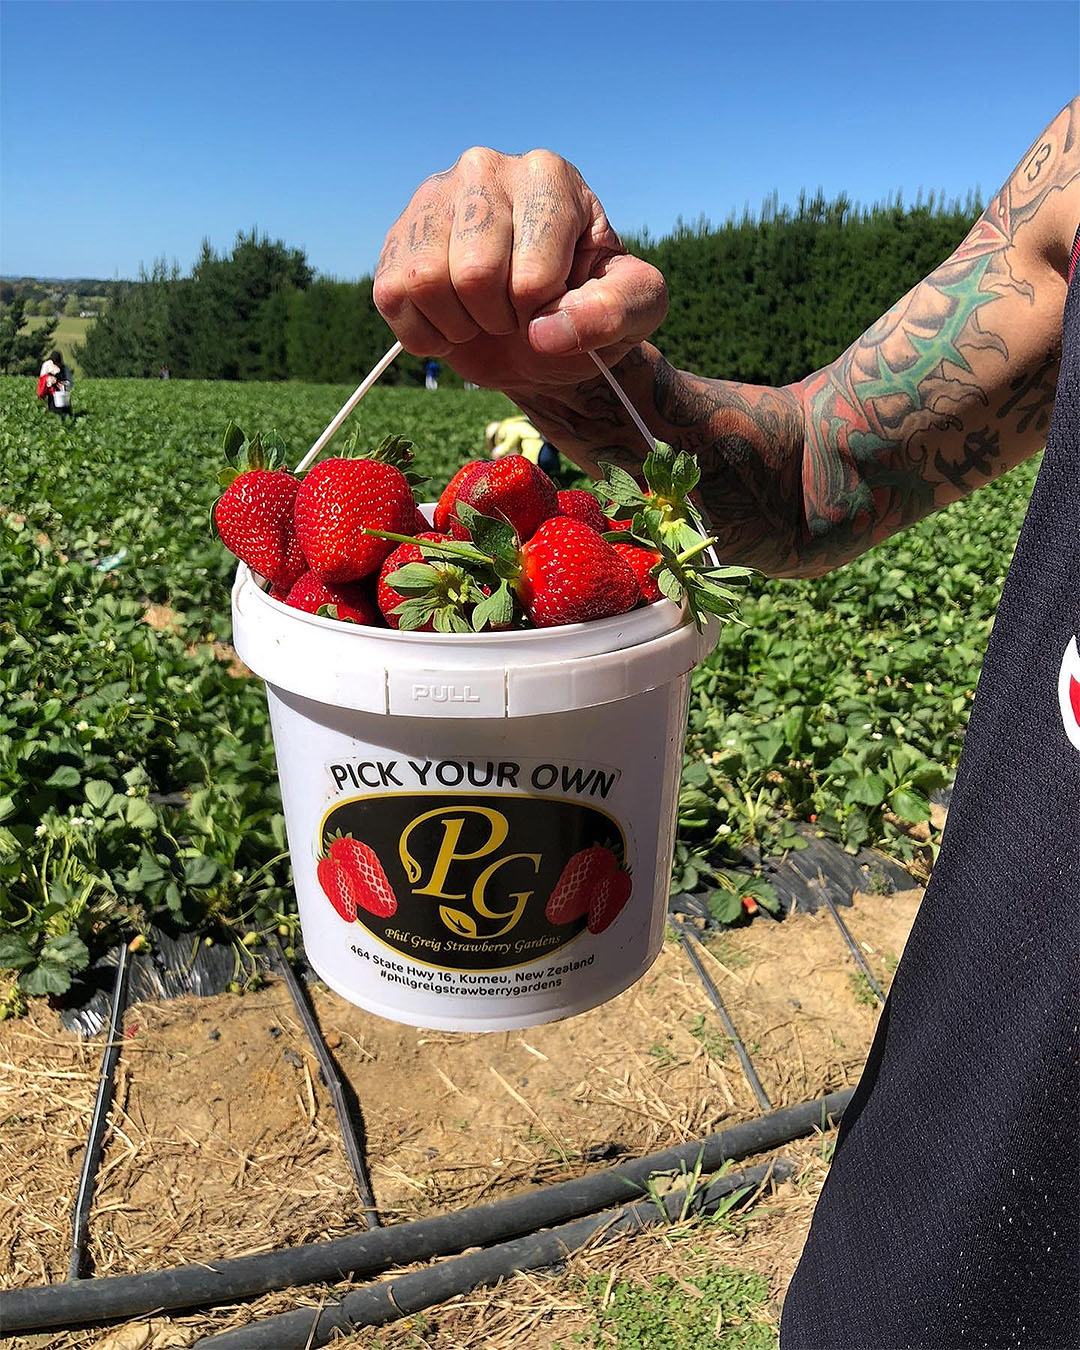 A man holds a huge punnet of strawberries at Phil Greig, one of the best places for strawberry picking in Auckland.